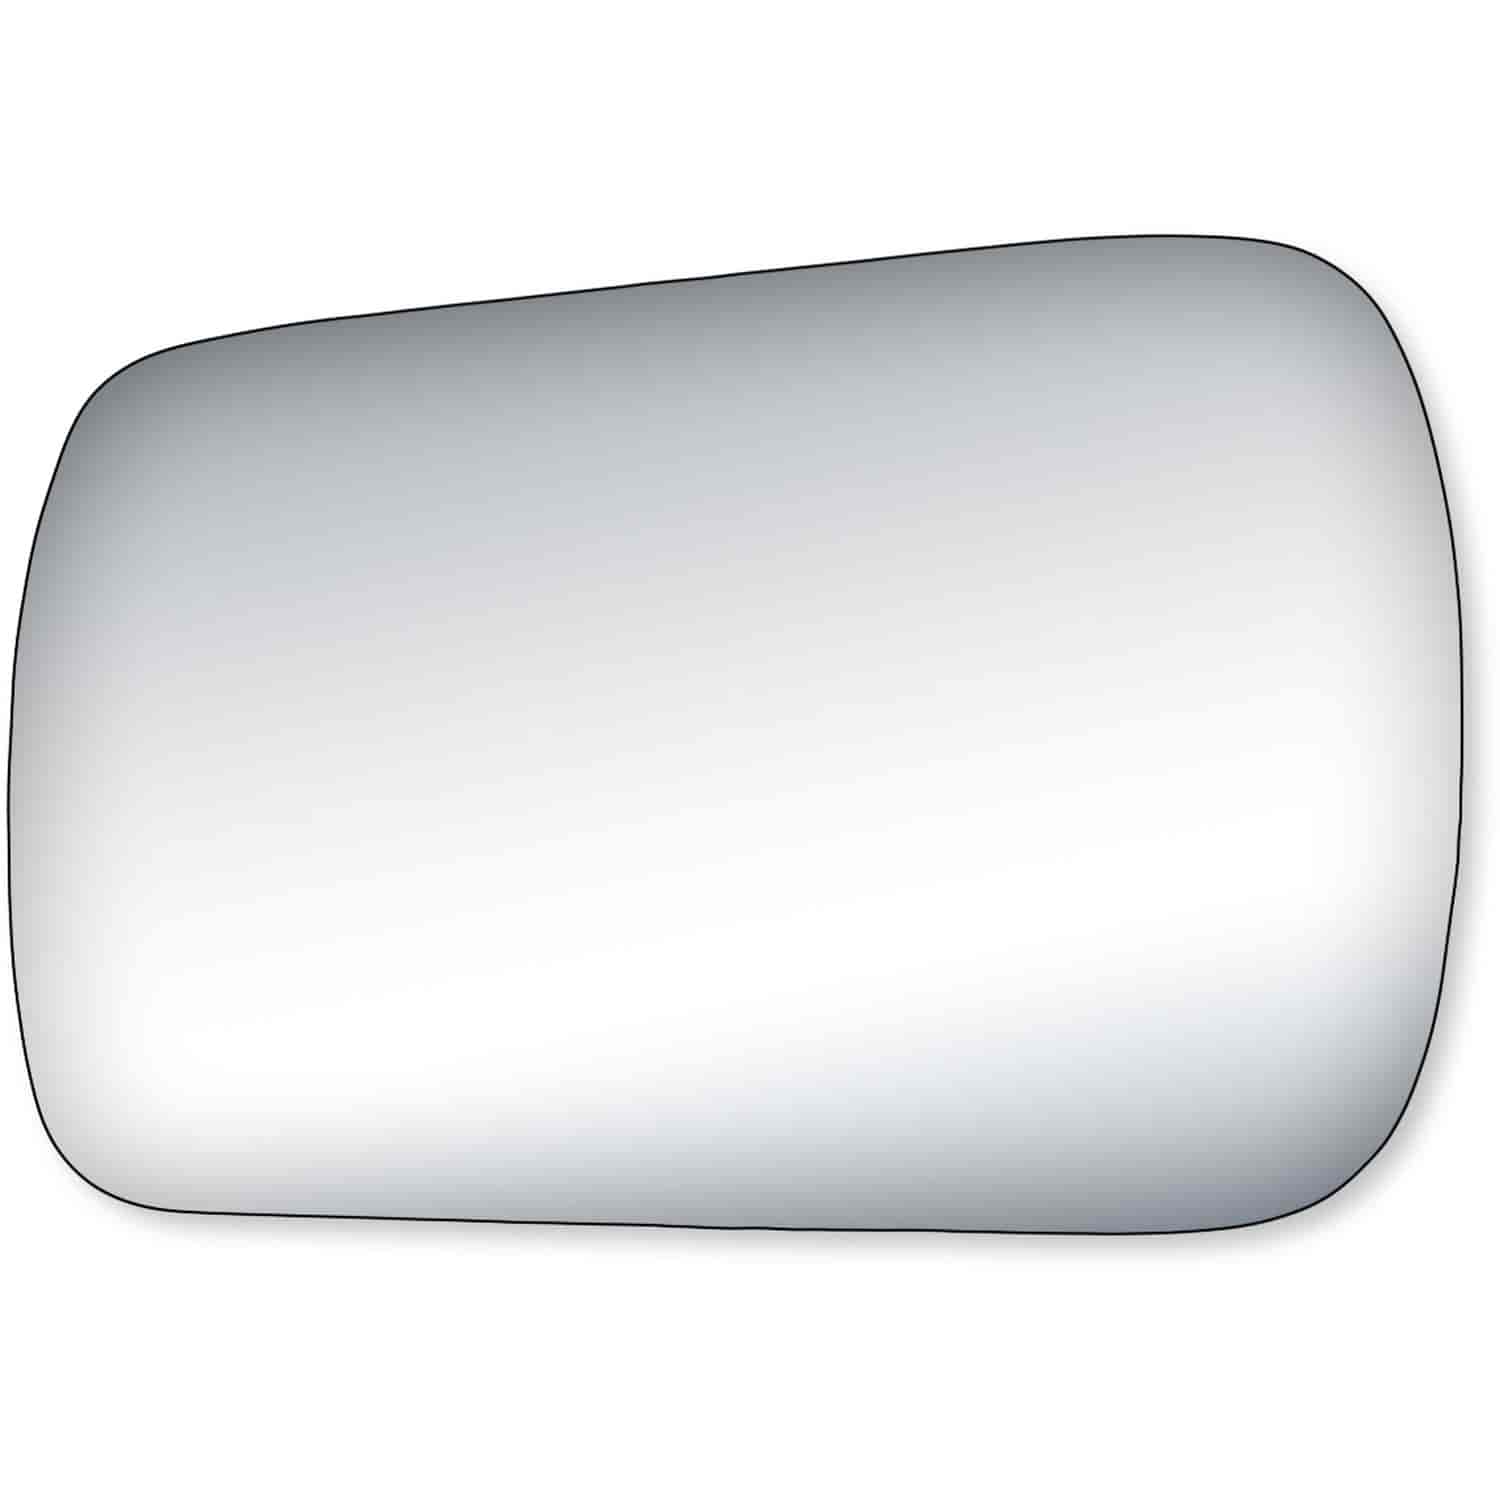 Replacement Glass for 00-04 Avalon the glass measures 4 3/8 tall by 6 3/4 wide and 7 2/16 diagonally